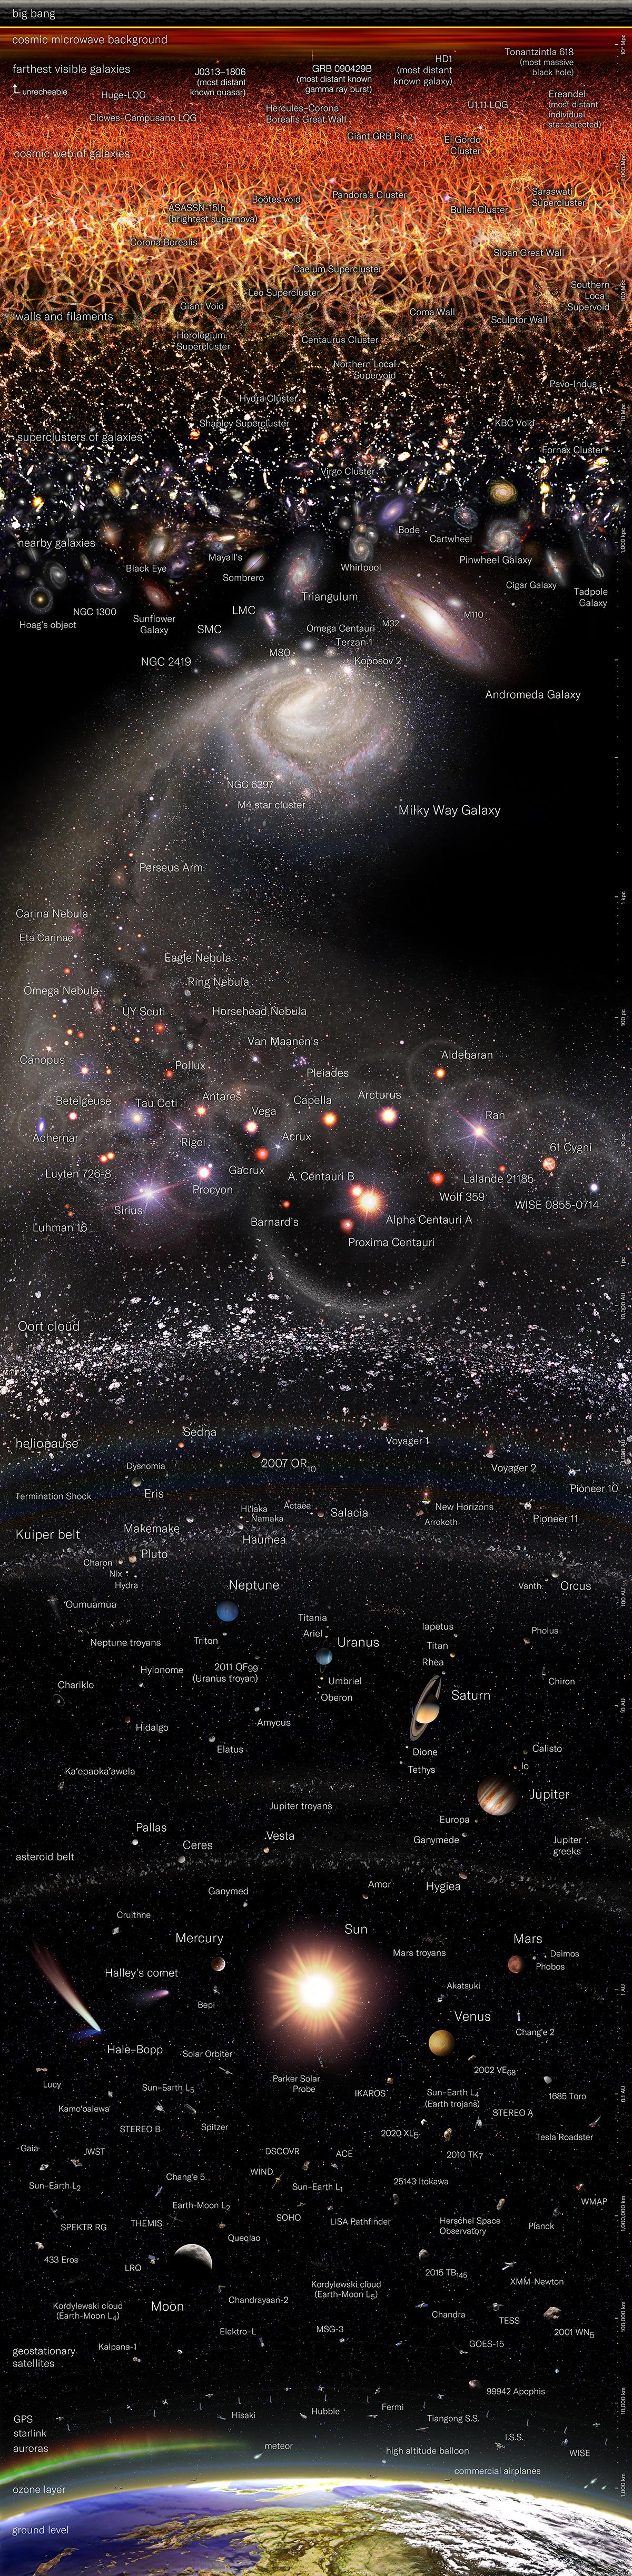 Logarithmic view of the history of the universe